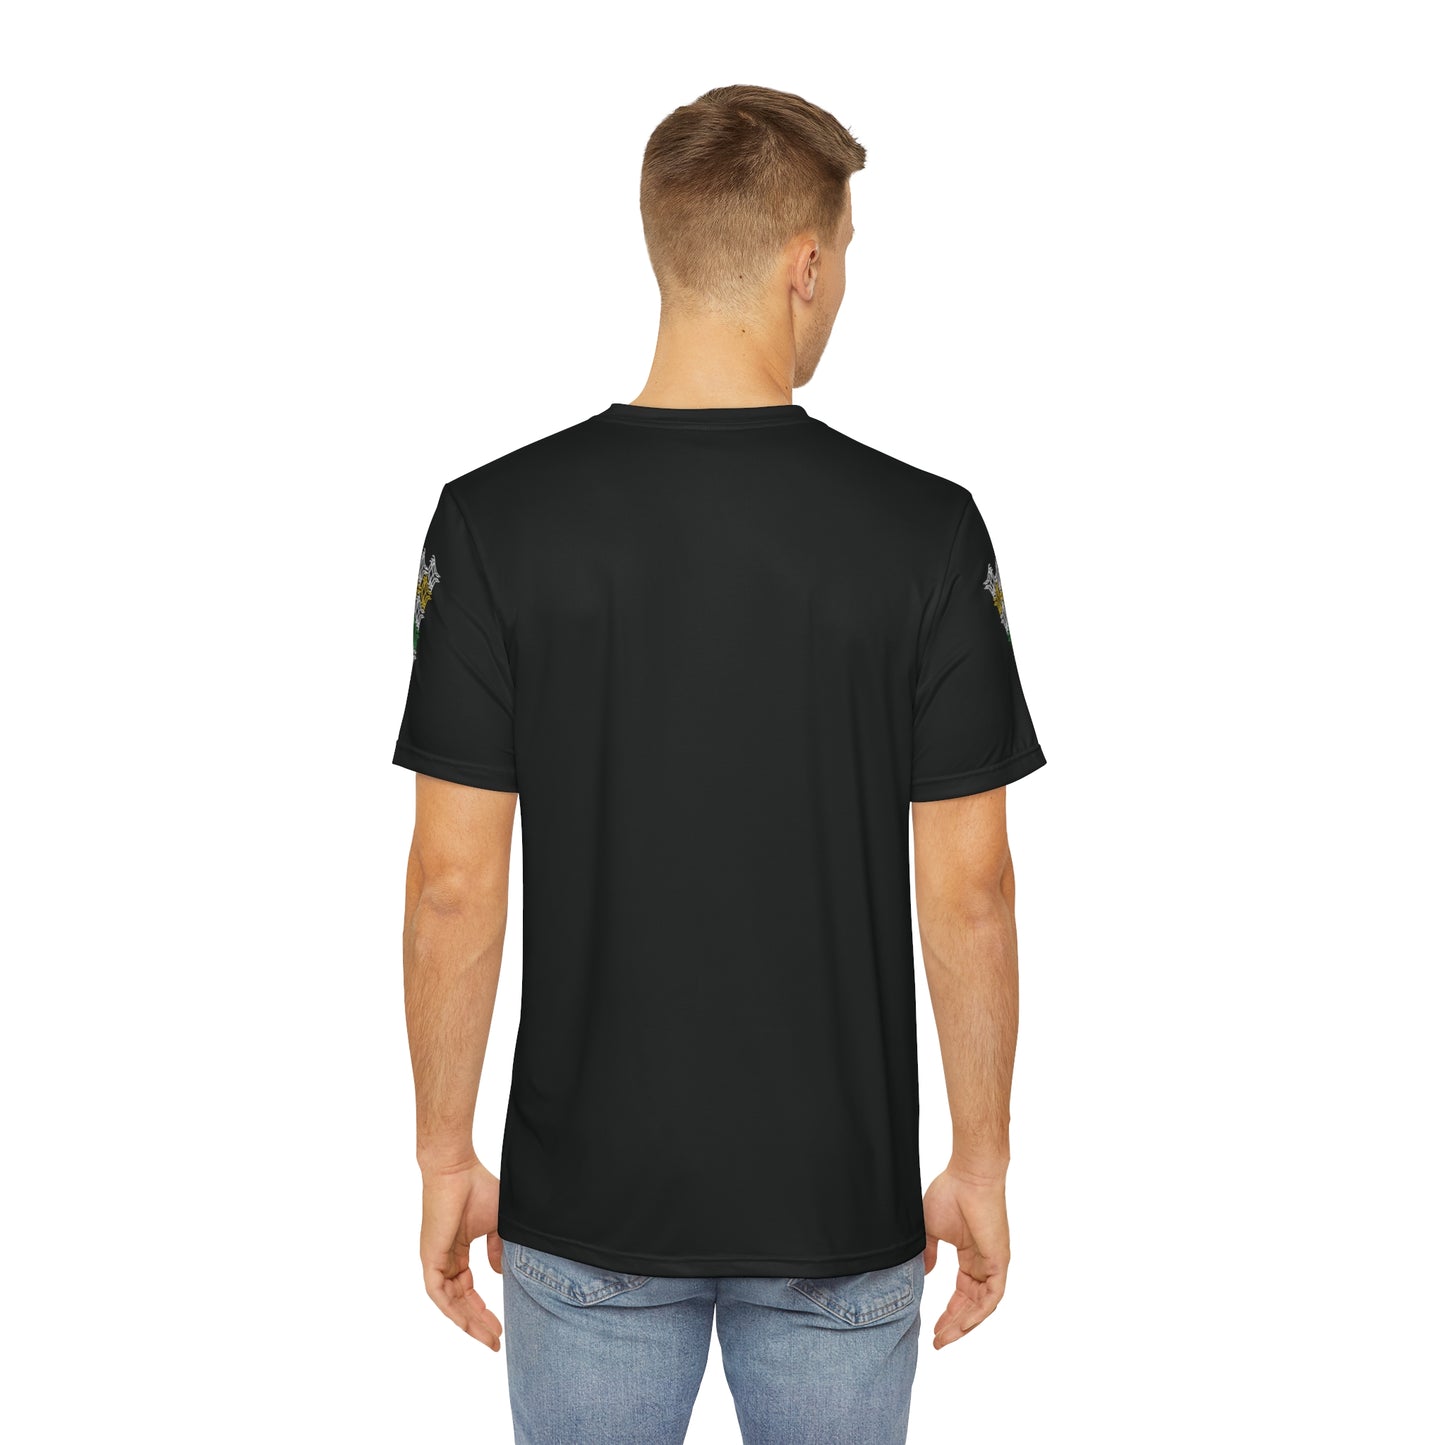 Men's Polyester Graphic T-shirt - Black with JA Colors